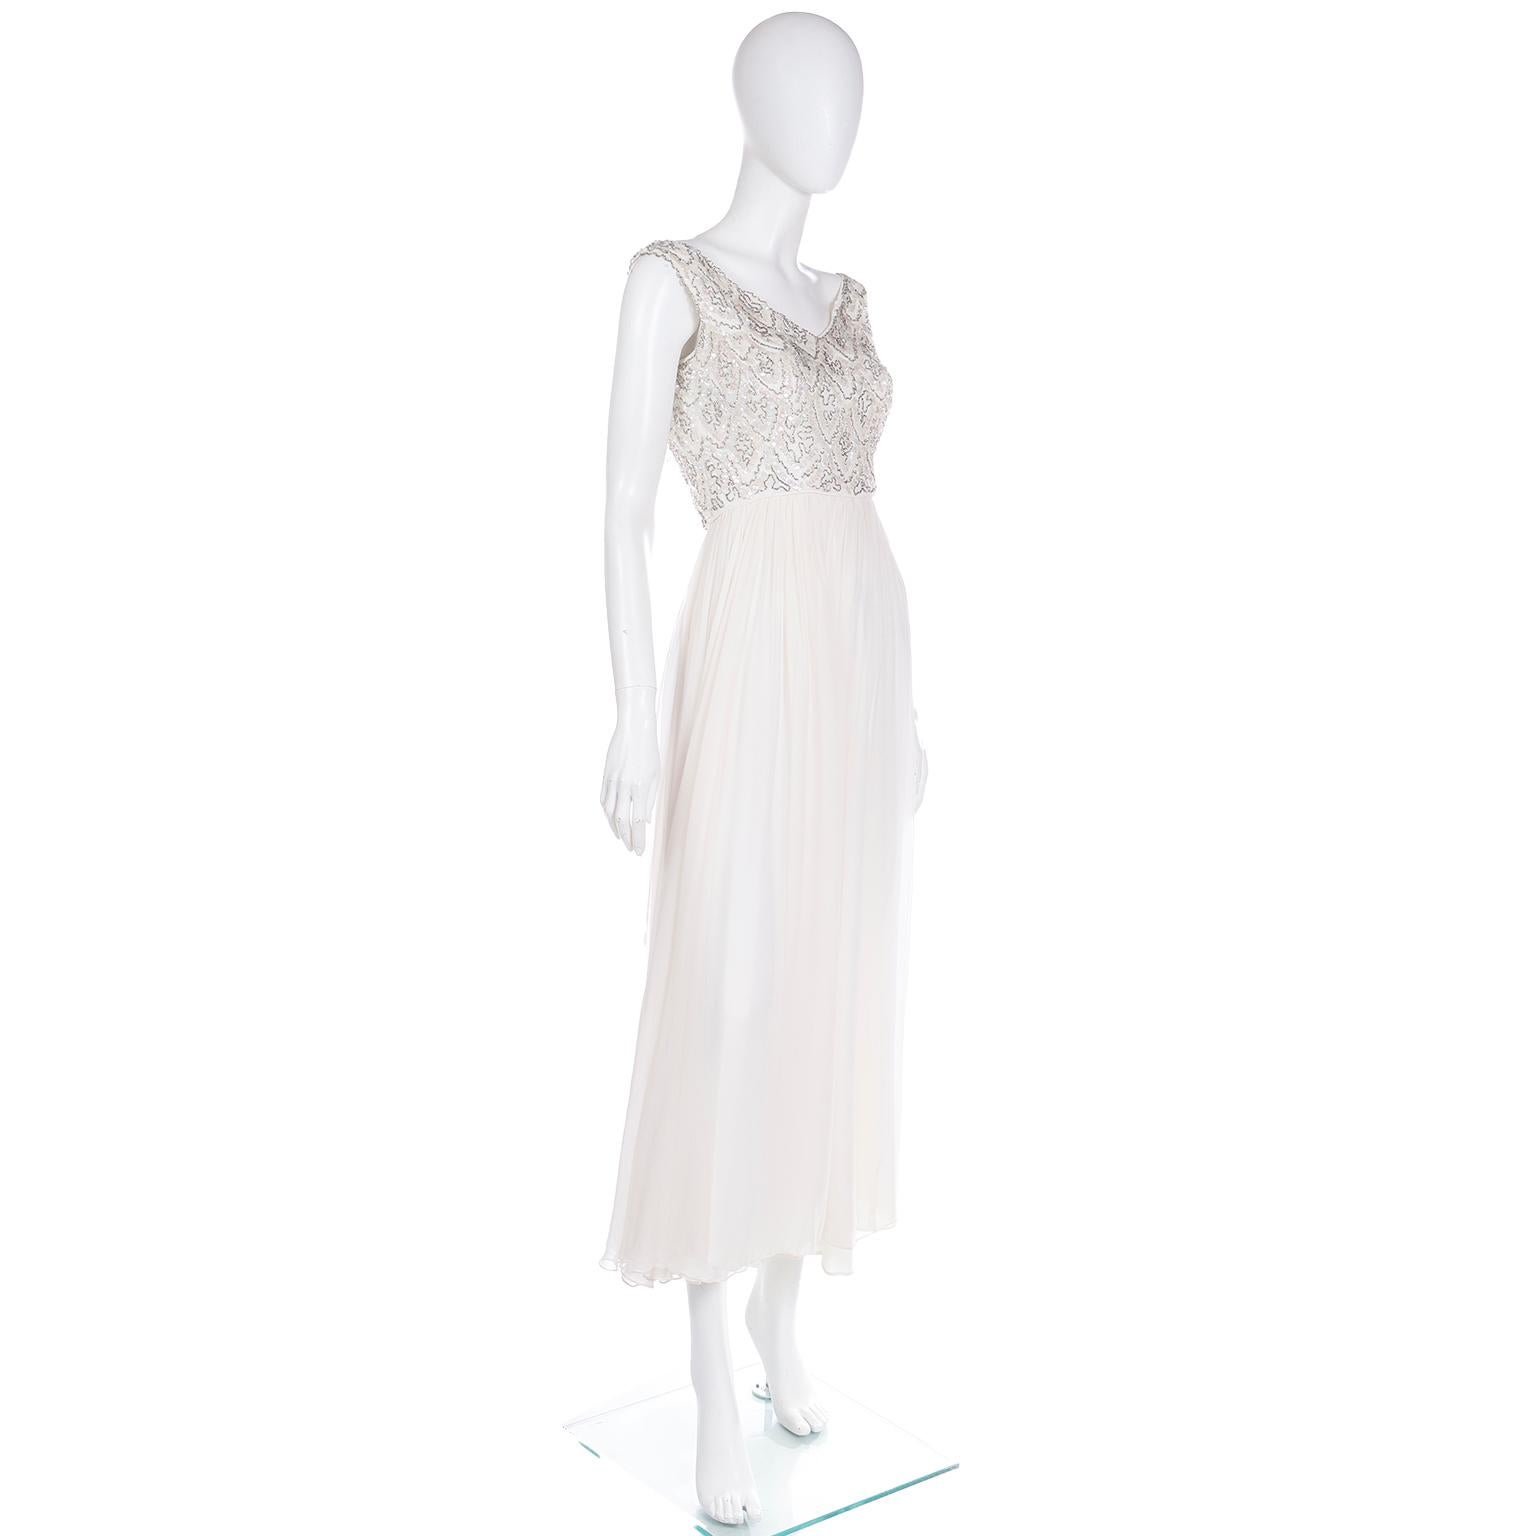 1960s White Silk Chiffon Evening Dress With Silver Beads and Iridescent Sequins In Excellent Condition For Sale In Portland, OR